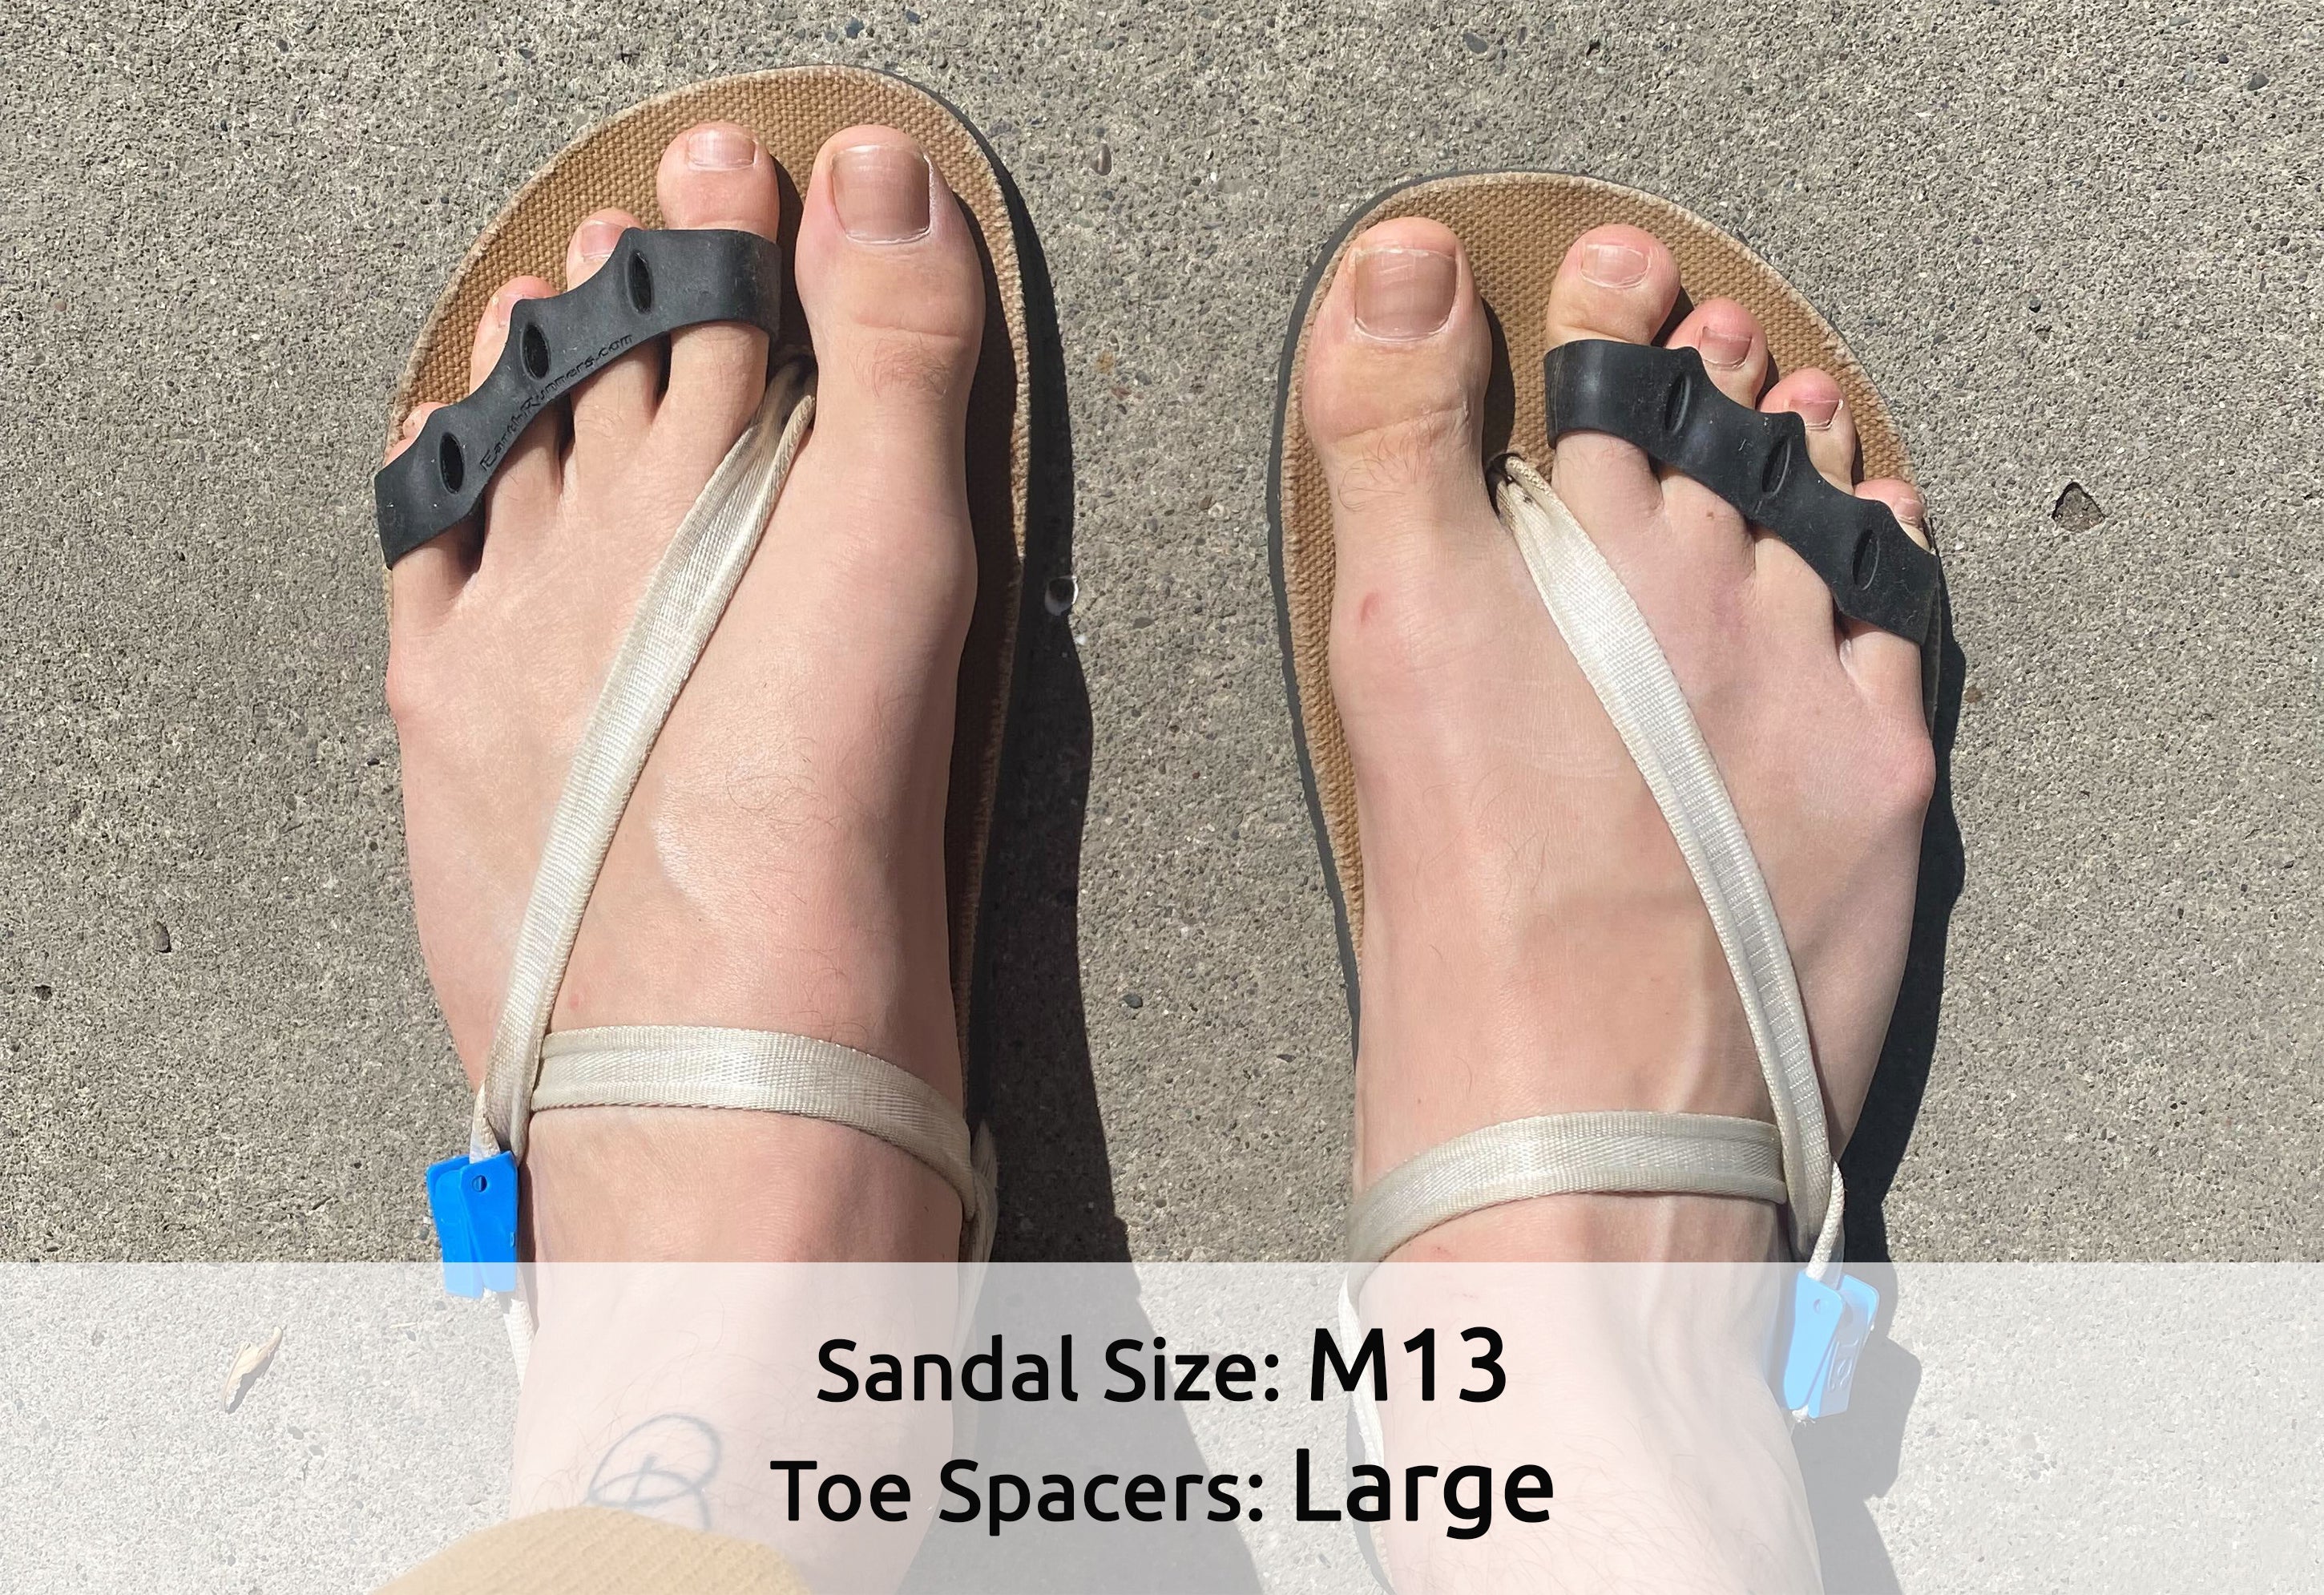 Earth Runners - Toe spacers are an easy way to rehab your feet. Some of the  benefits of this convenient foot health tool include: 🔹Toe spacers align  the toes in a natural